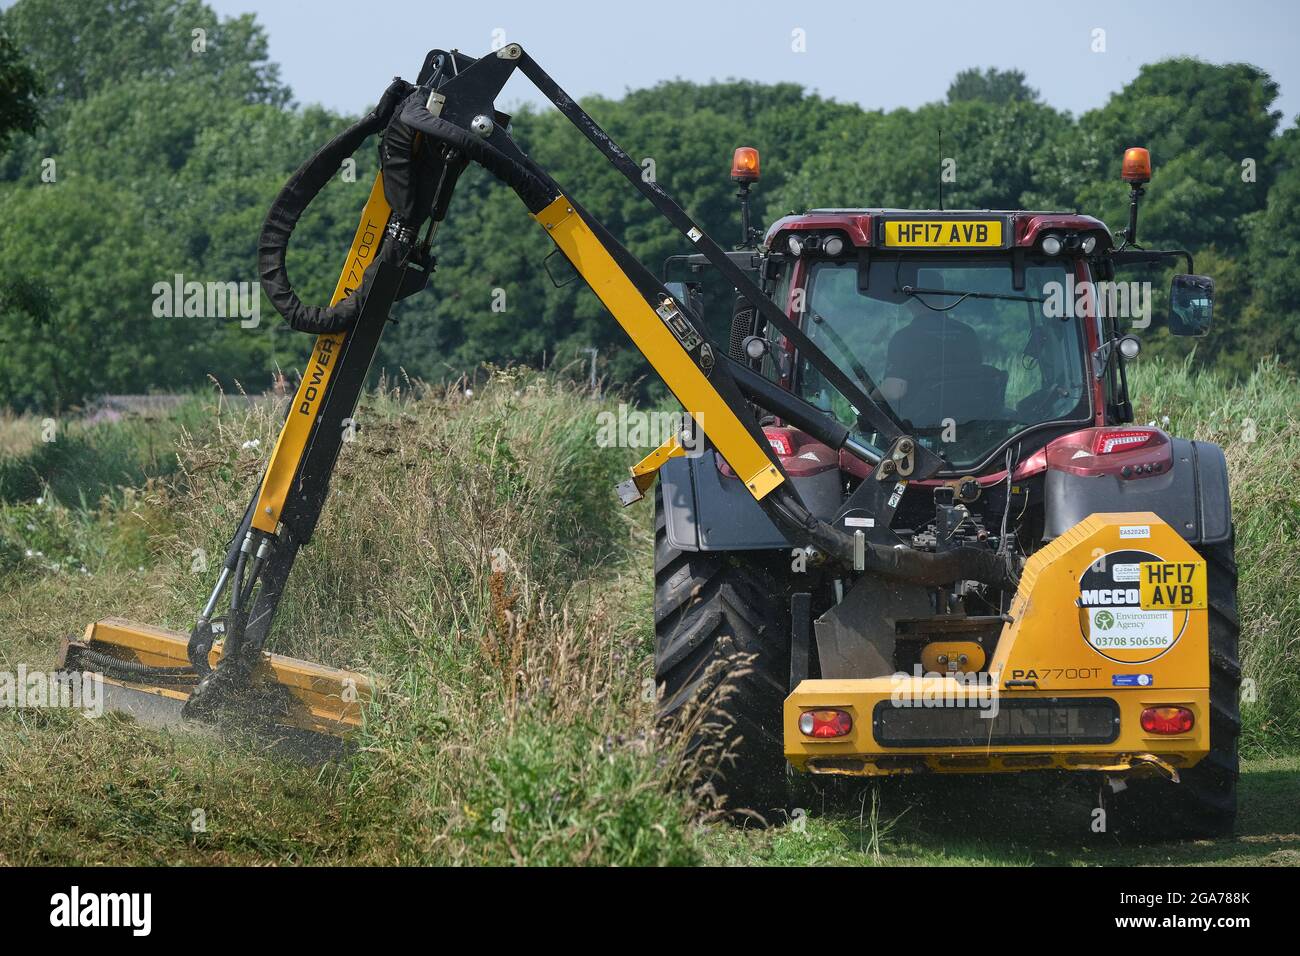 Environmental agency team cutting grass and working on dykes in rural area. Stock Photo